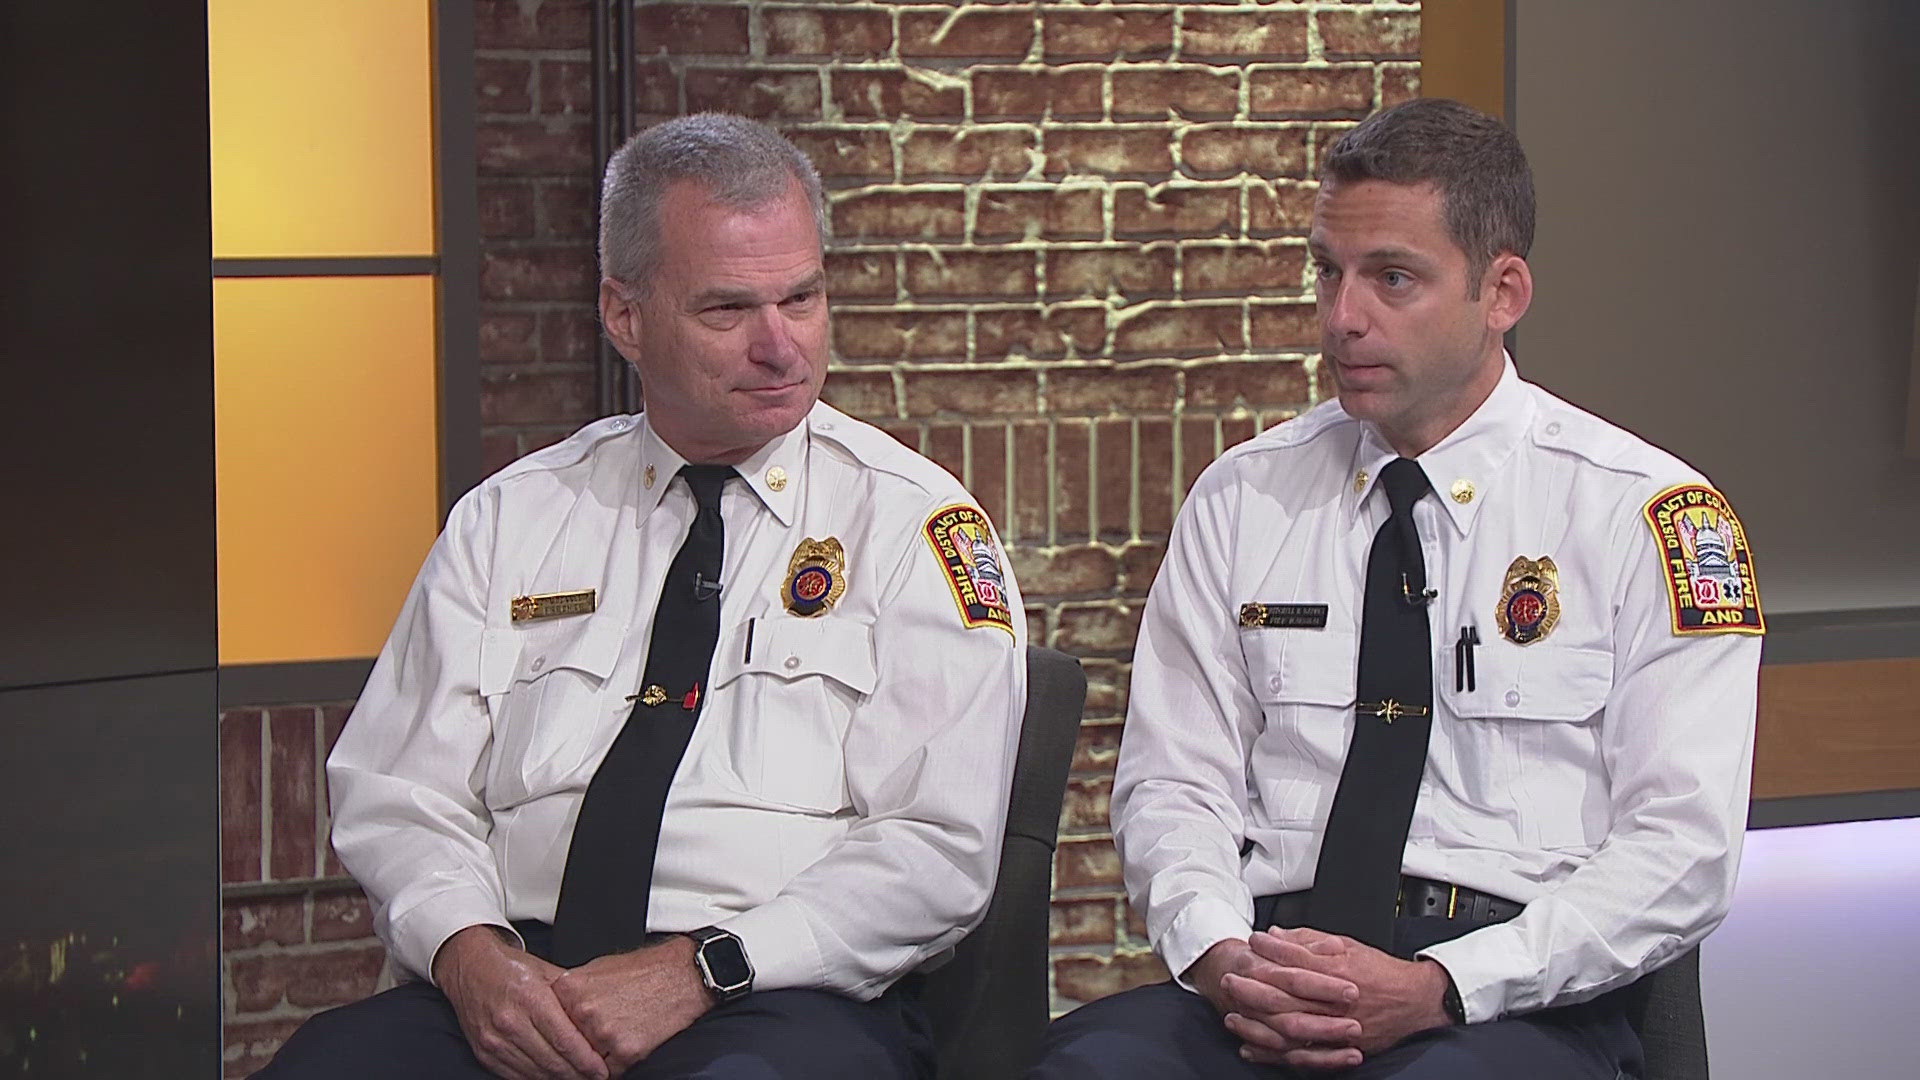 DC Fire Chief John Donnelly and Deputy Fire Chief Mitchell Kannry stopped by WUSA9 on Tuesday.